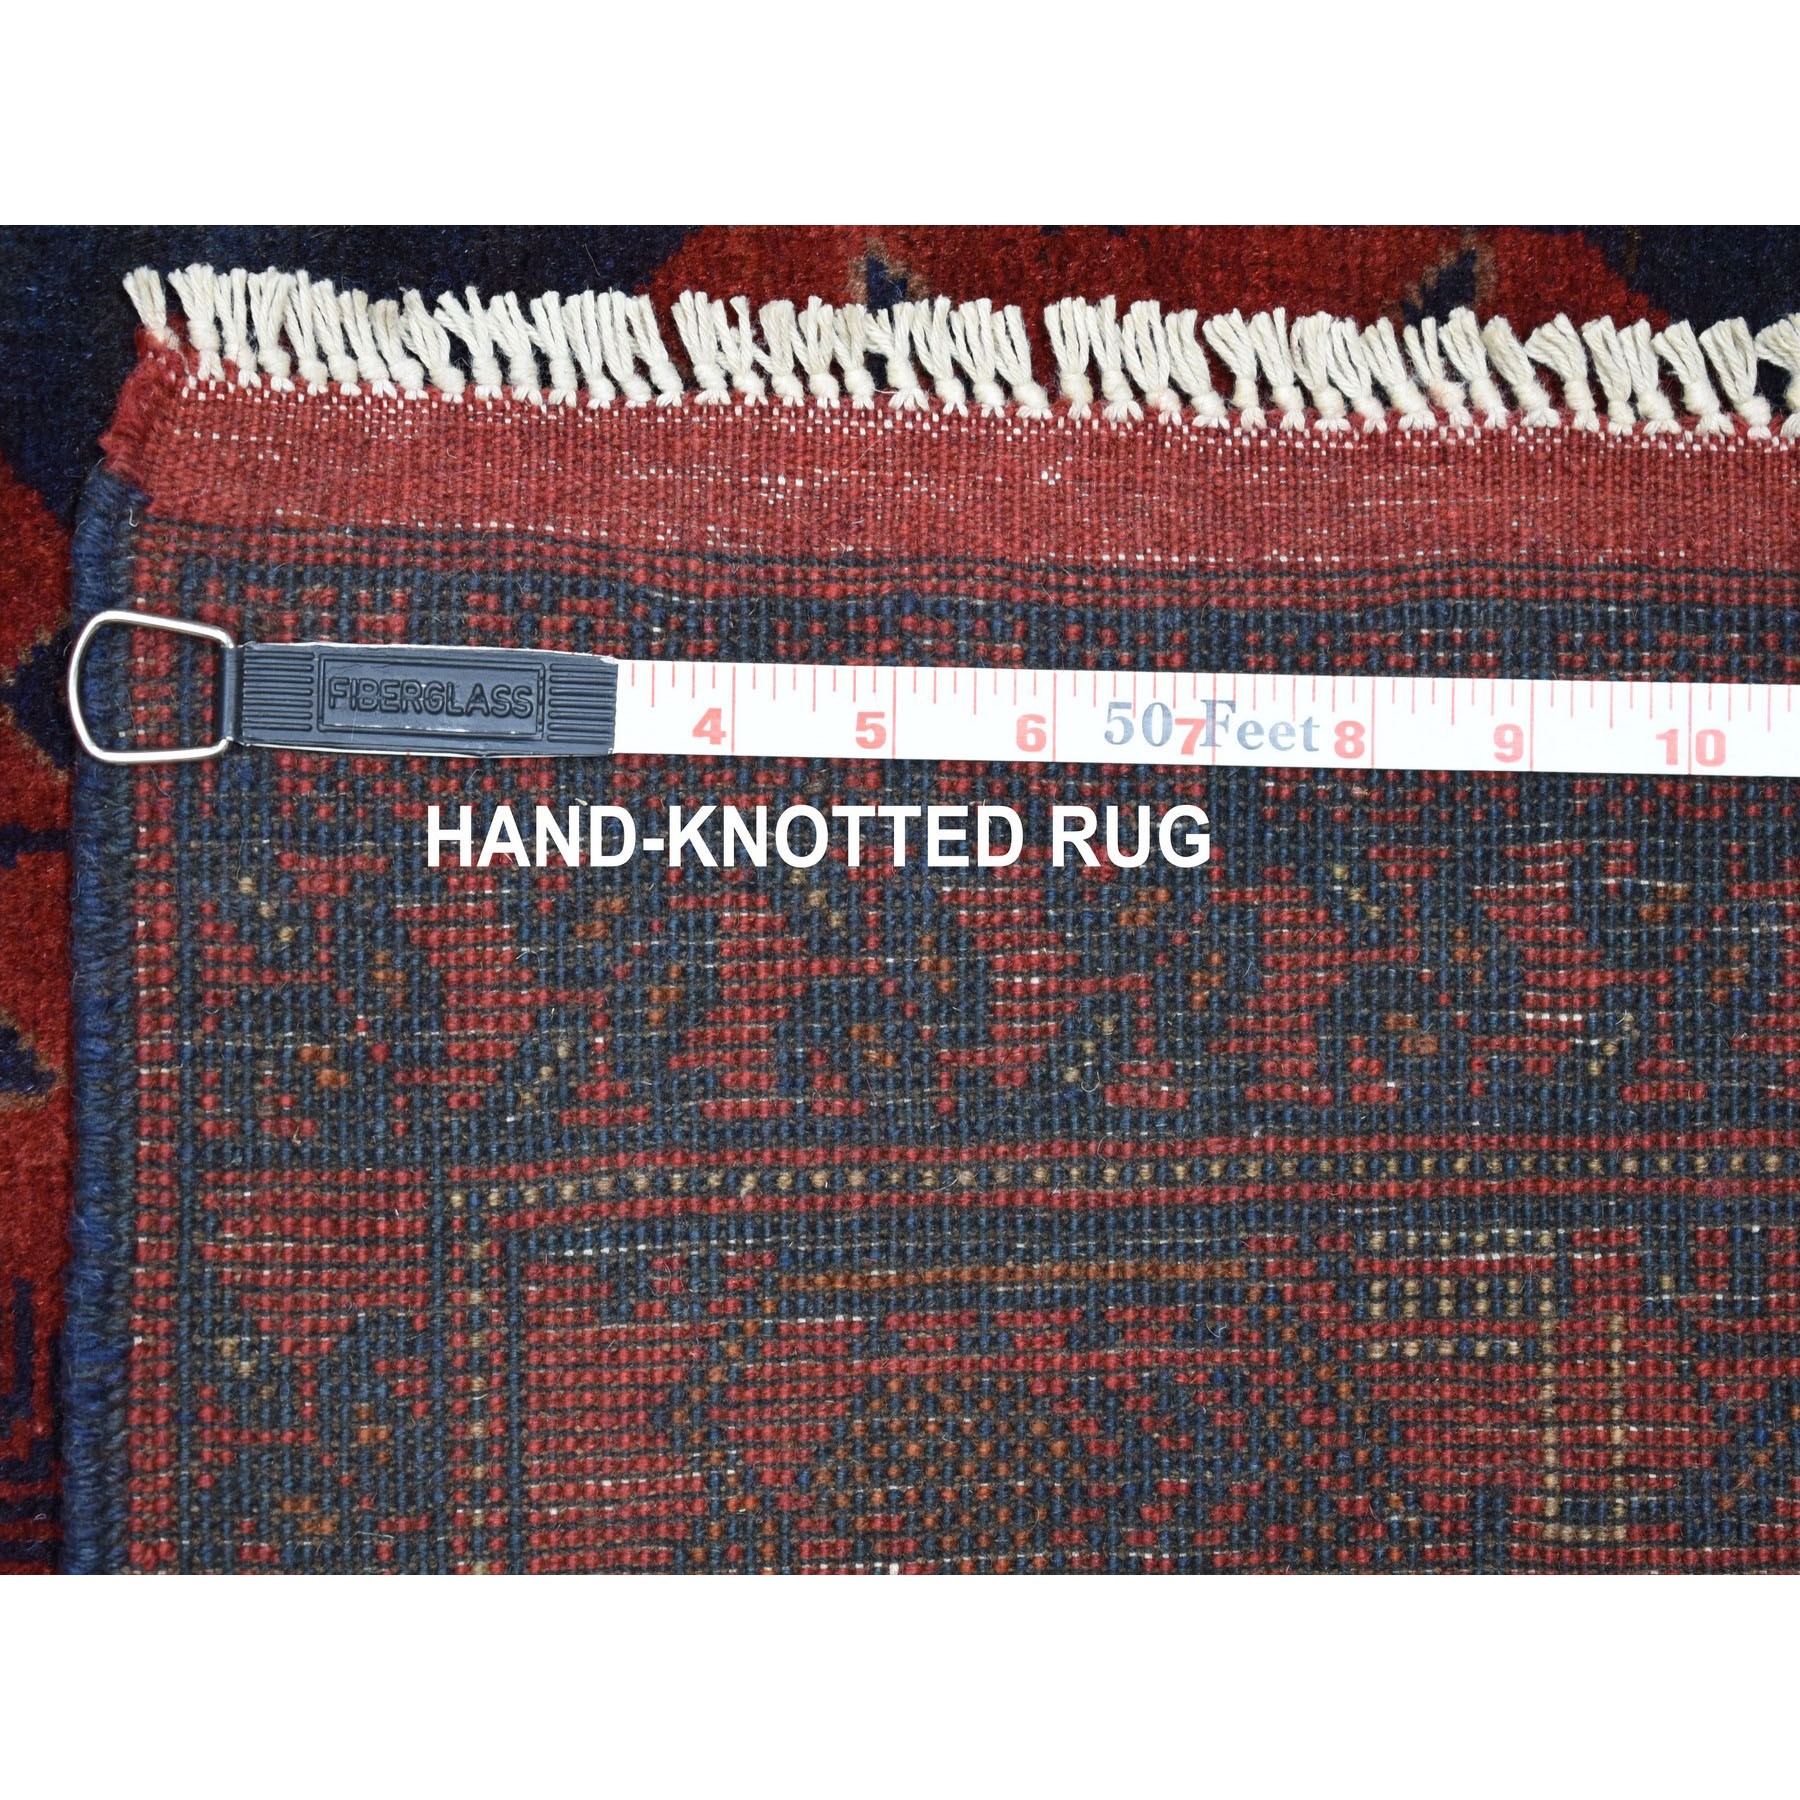 2-9 x6-3  Deep and Saturated Red Geometric Afghan Andkhoy Pure Wool Runner Hand Knotted Oriental Rug 